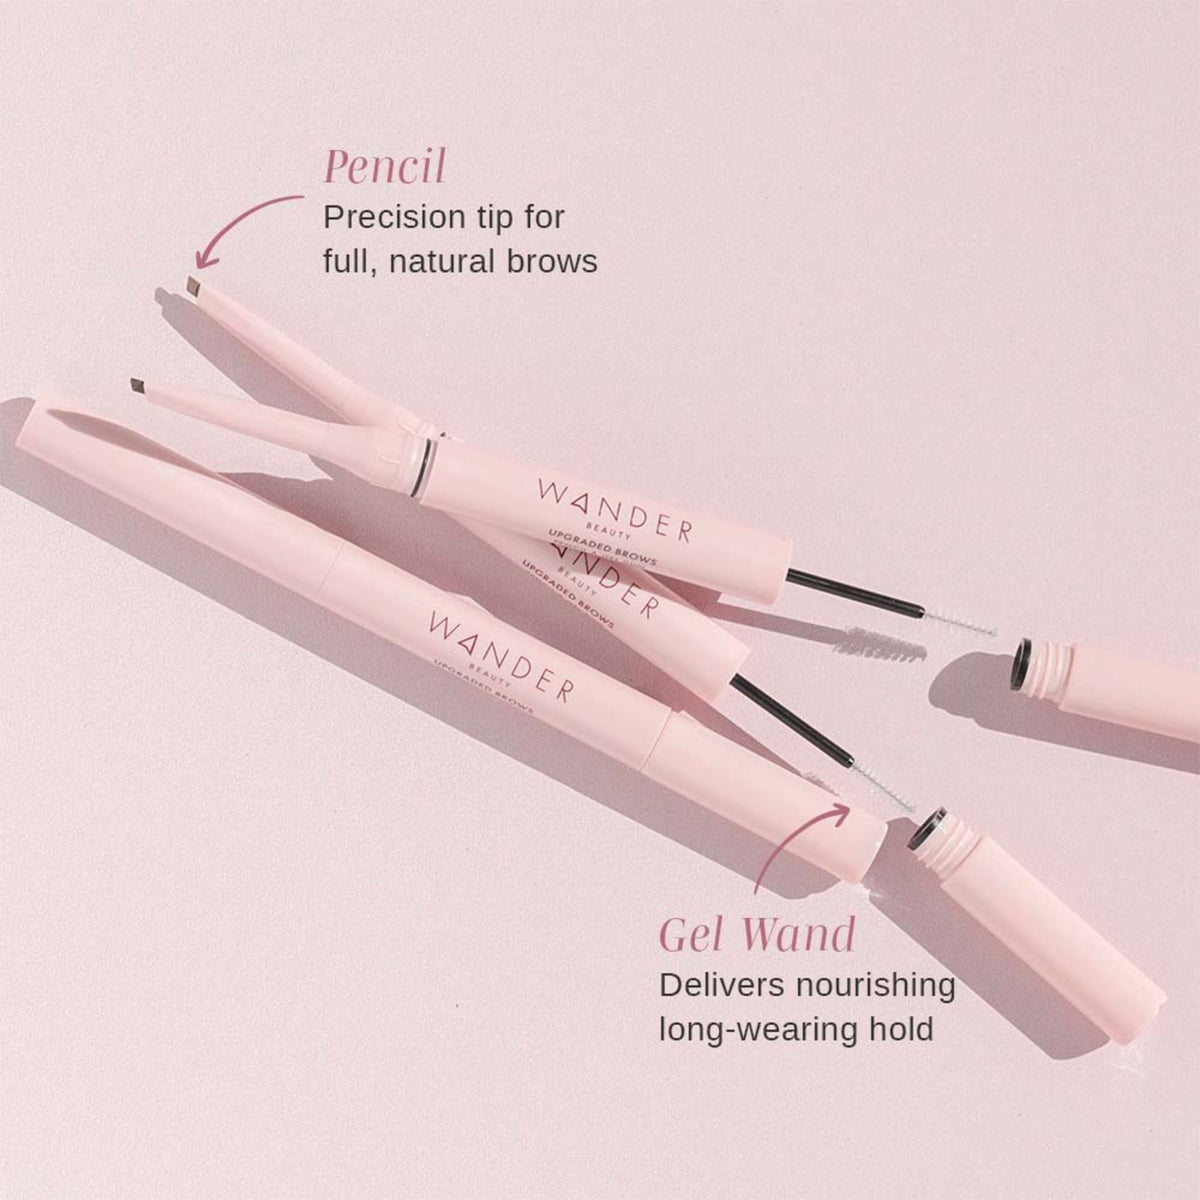 Wander Beauty Upgraded Brows Pencil and Treatment Gel Duo . This product is in the color brown